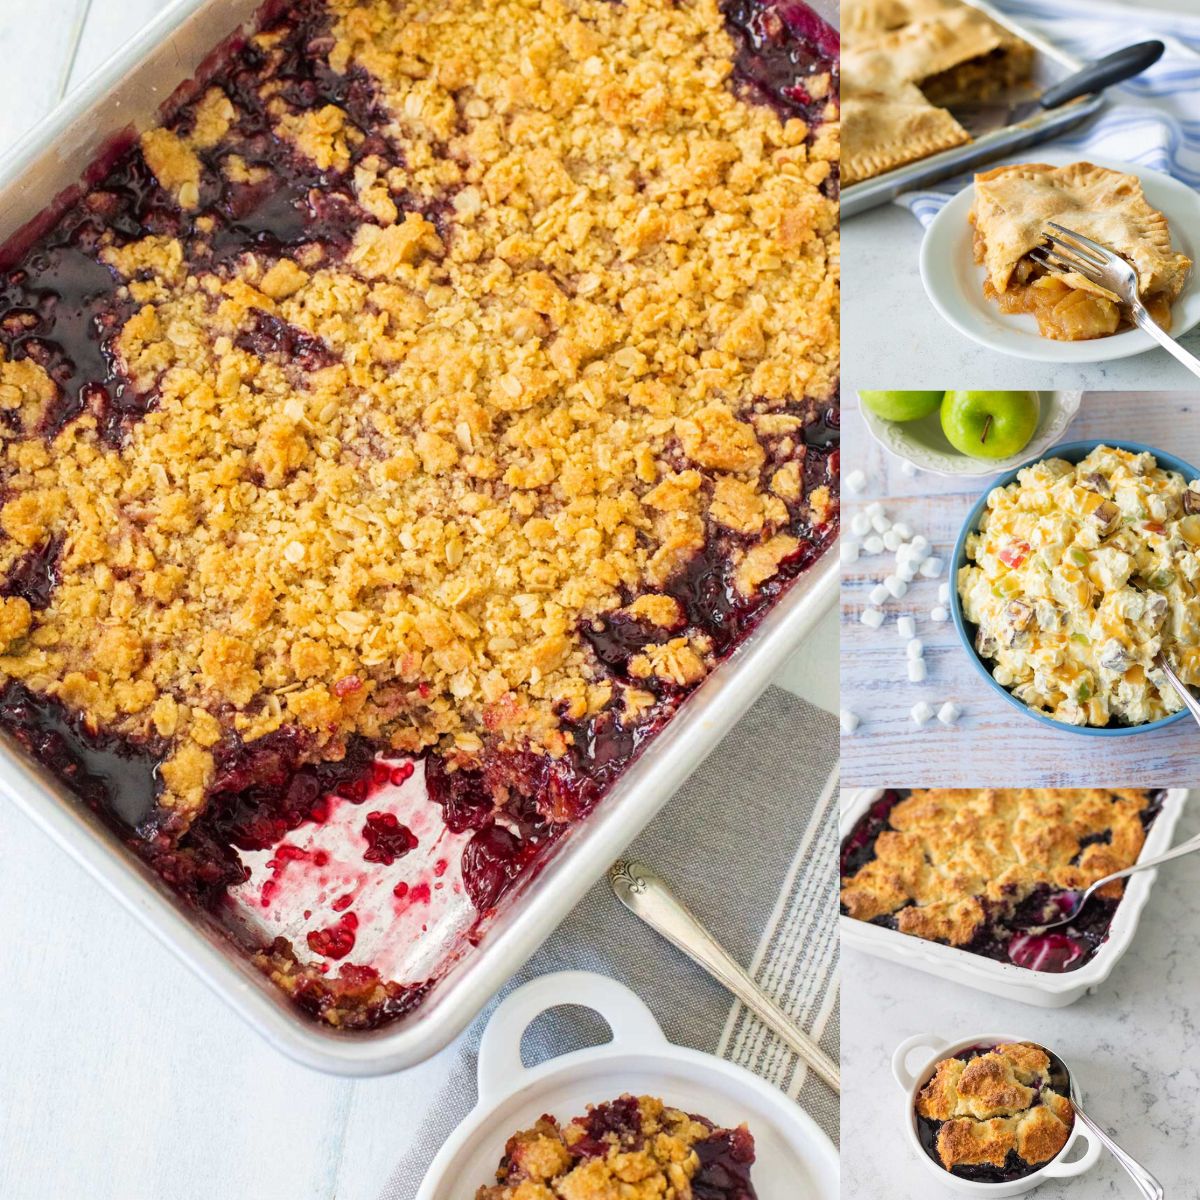 A photo collage shows 4 separate fresh fruit desserts that dads love.